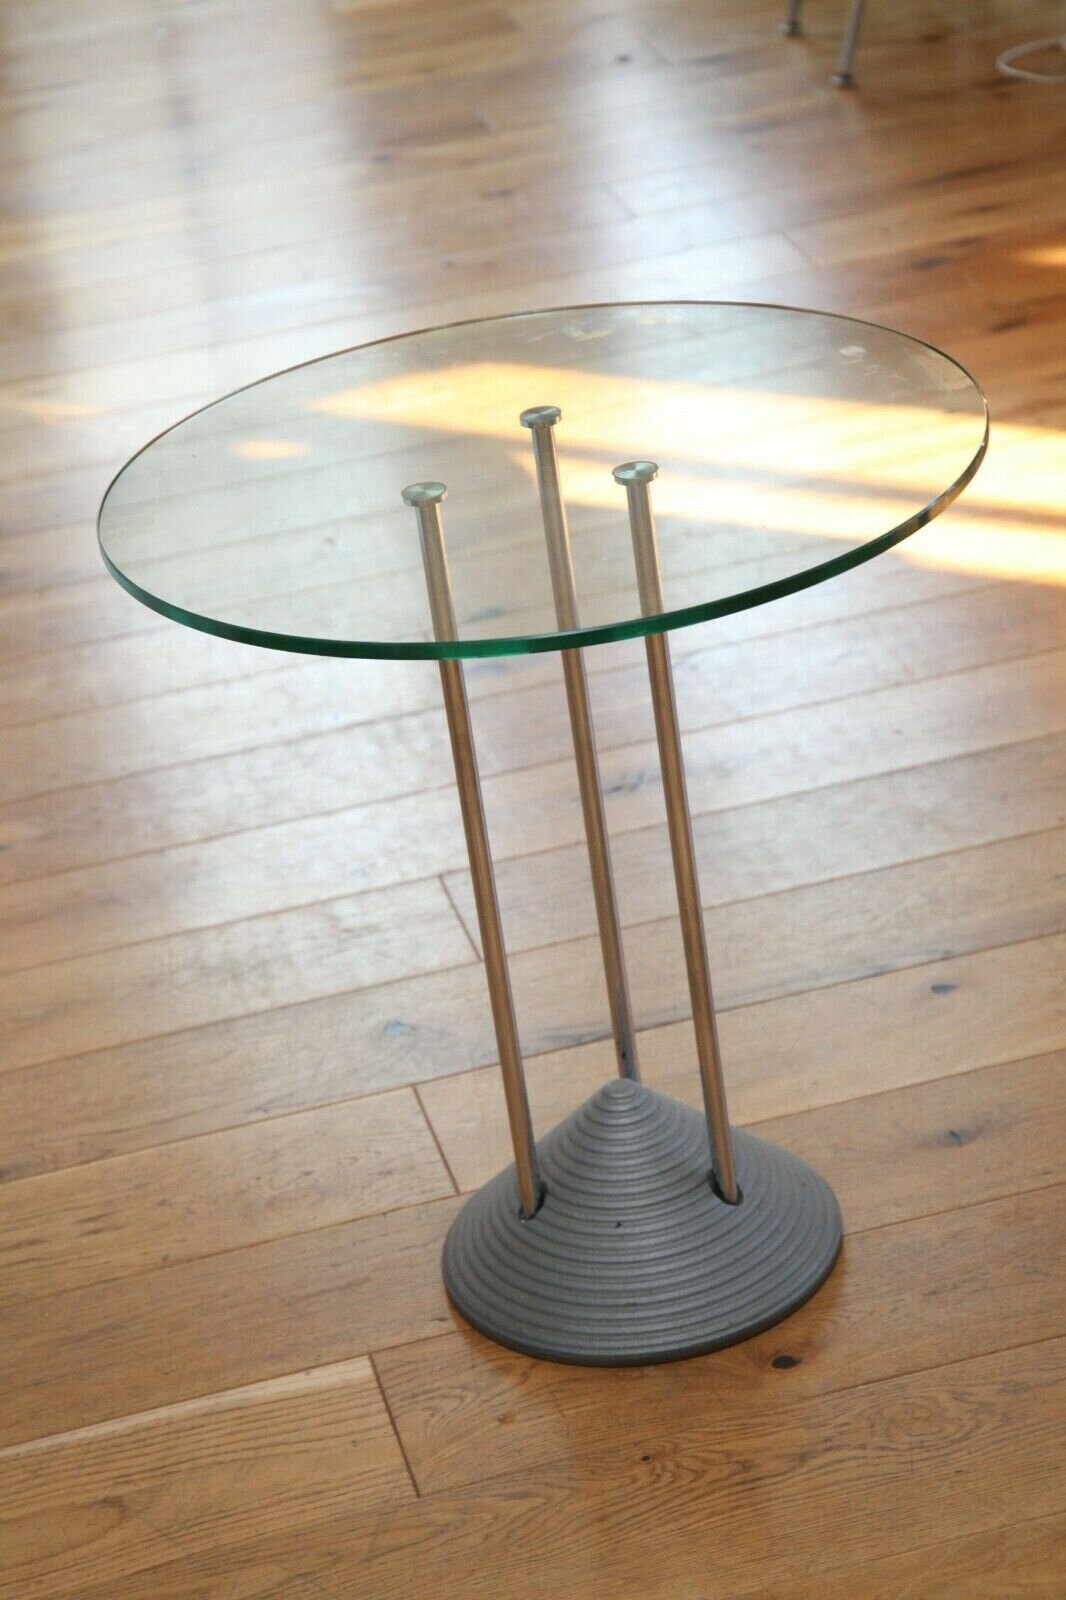 80s Memphis style table